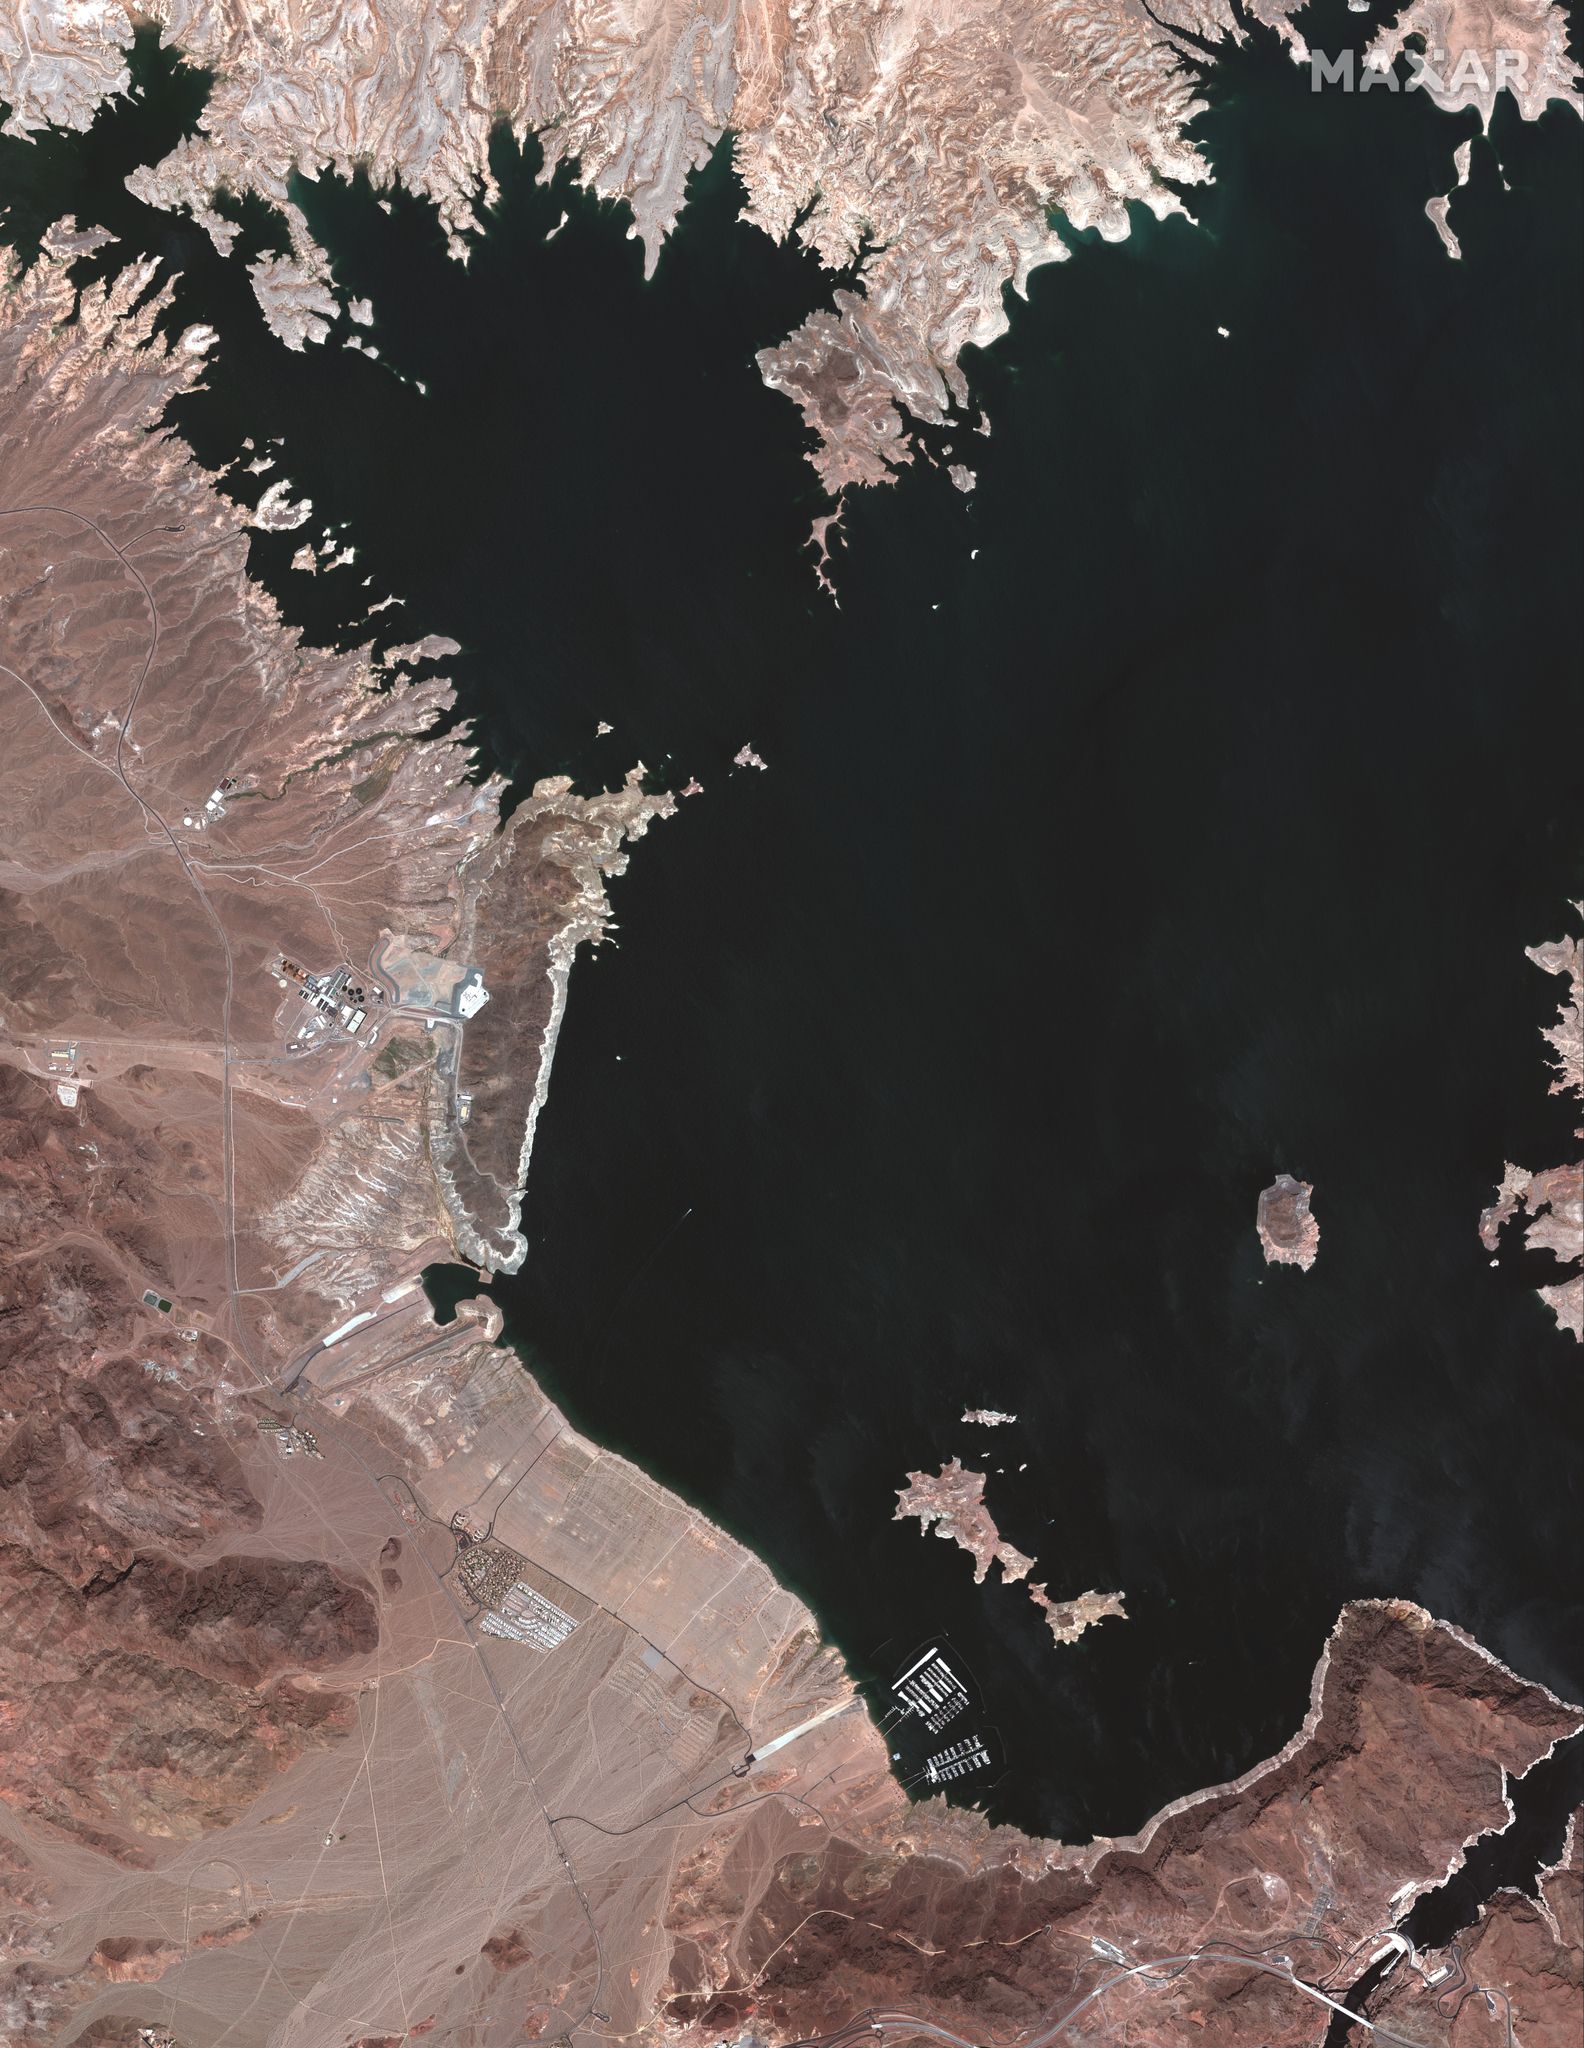 Overview of Southern Lake Mead and the Hoover Dam